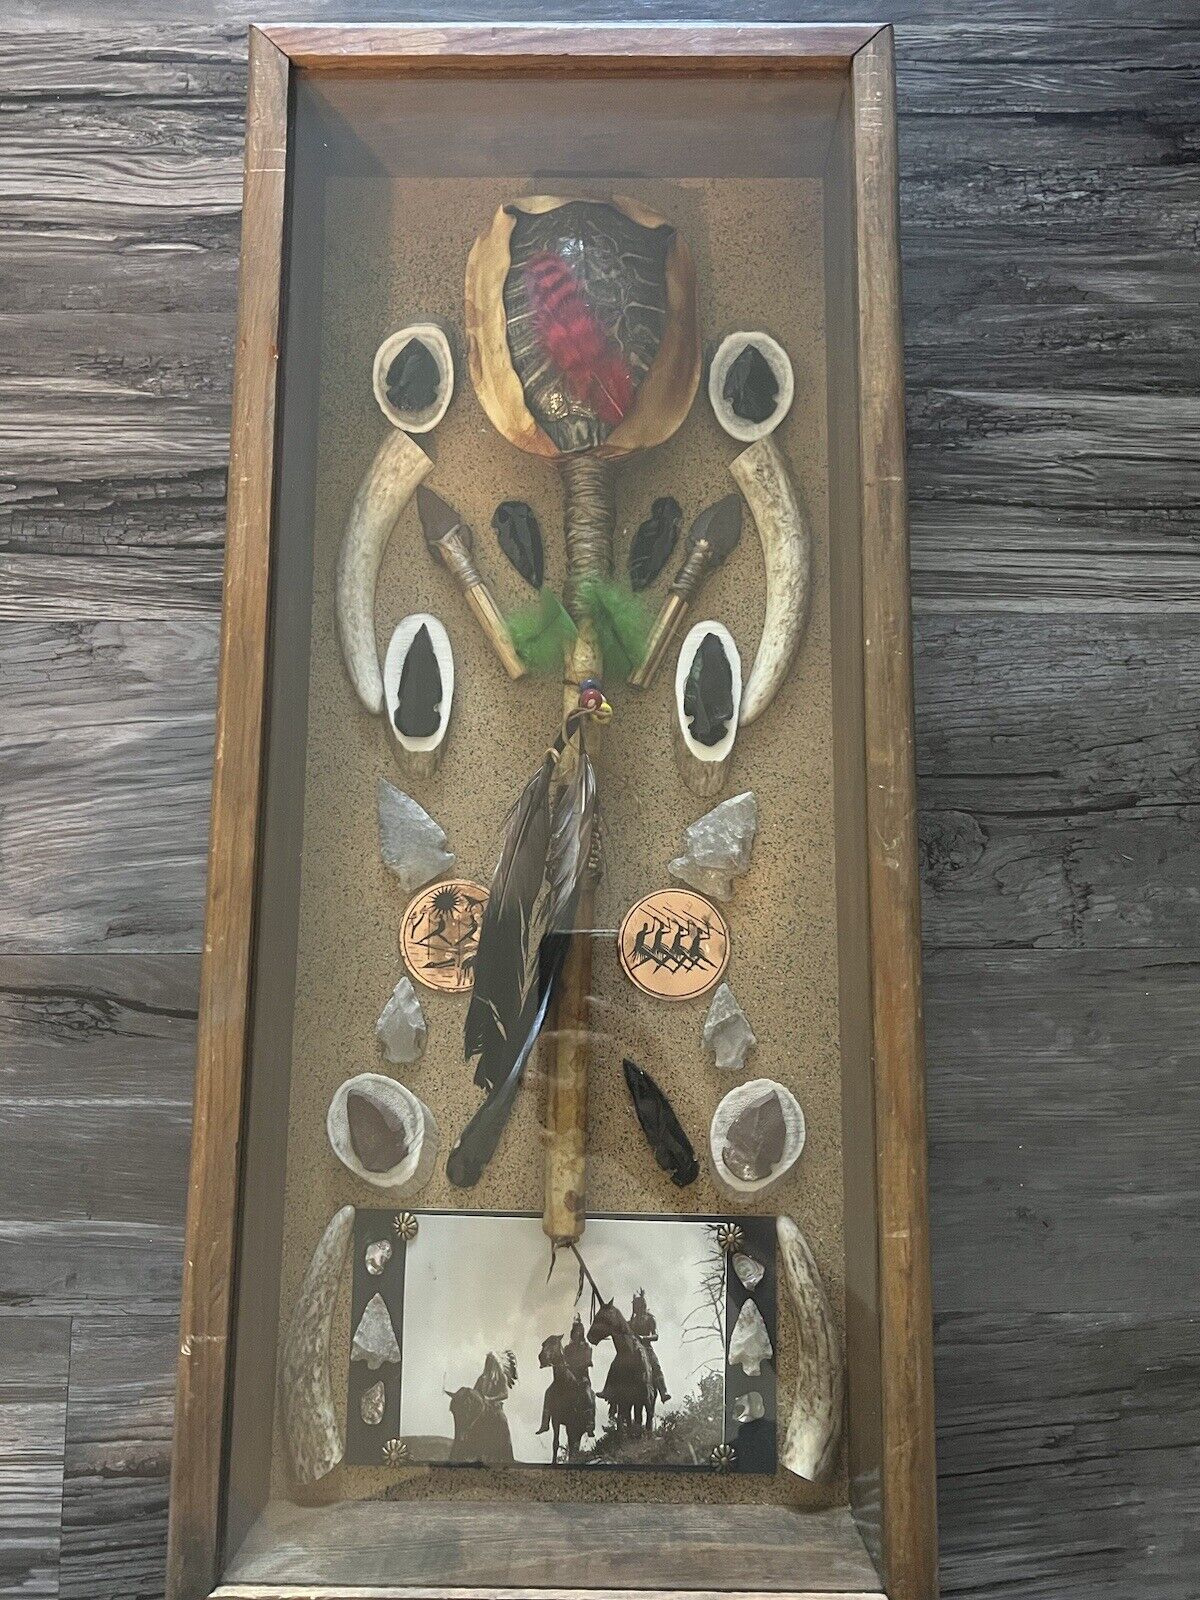 Native American Turtle Rattle Arrowheads in a Shadow Box Rare